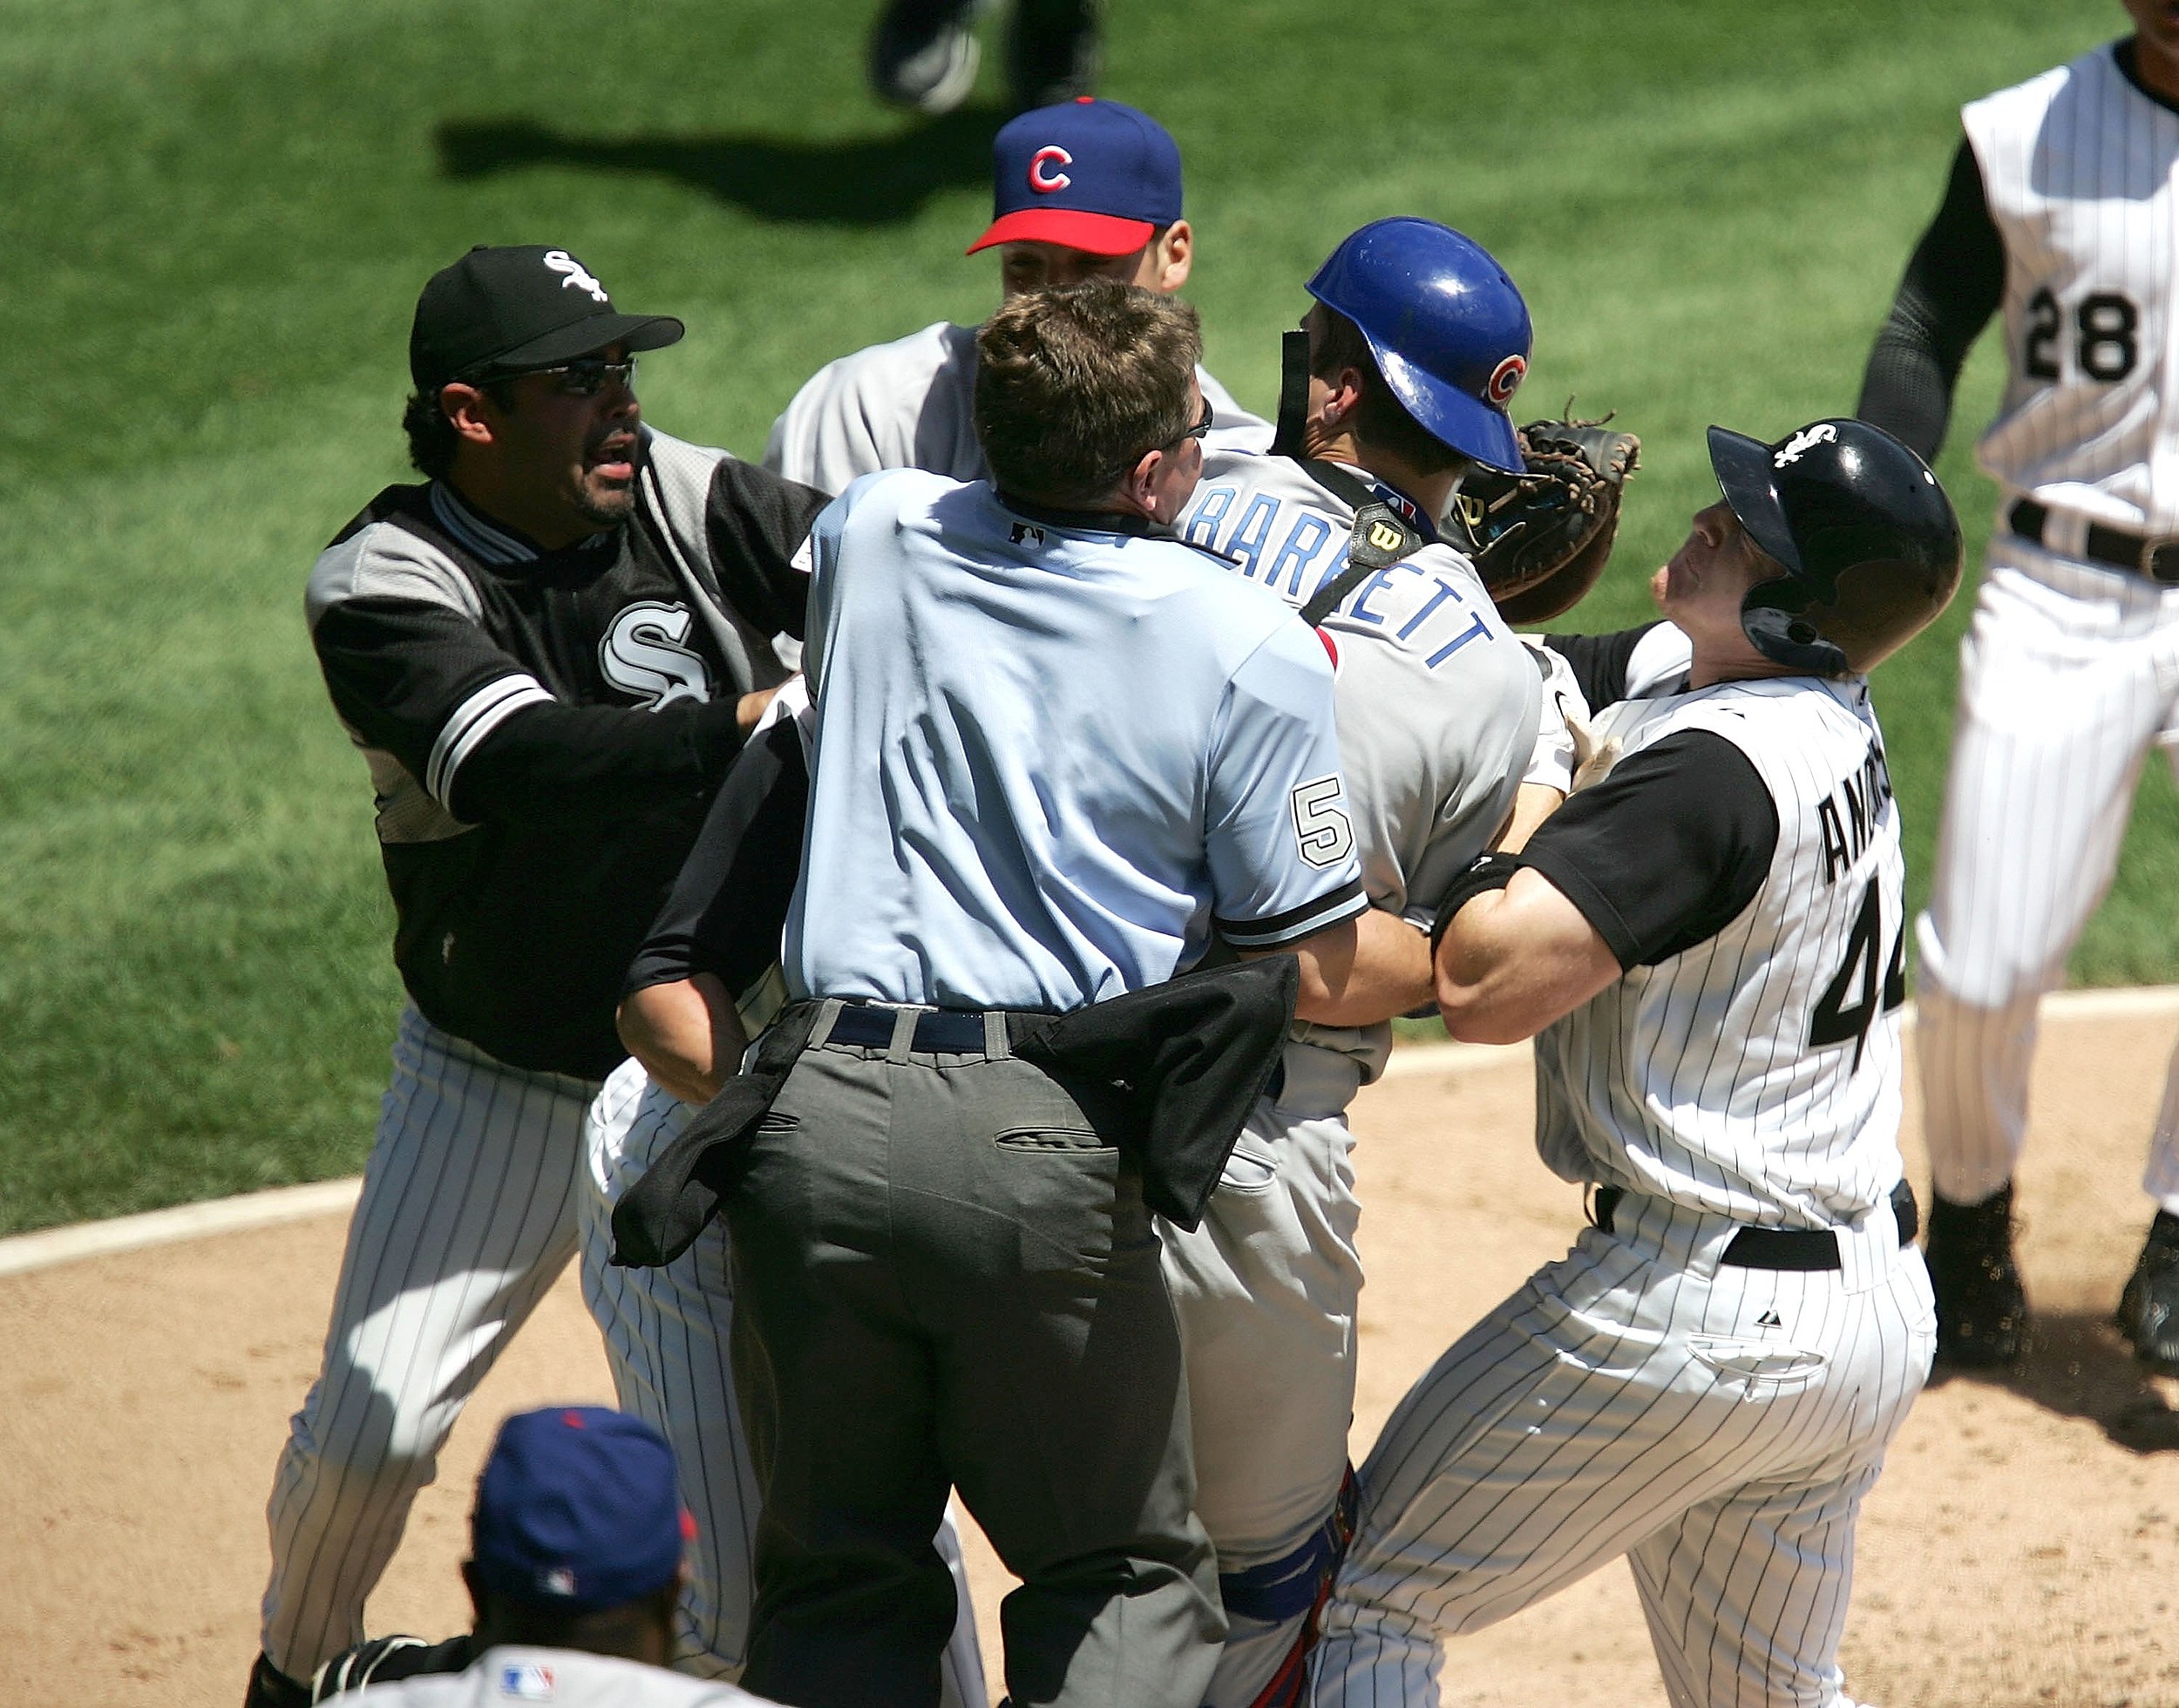 Just like today, 1986 Cubs-White Sox game took back seat to off-field issues